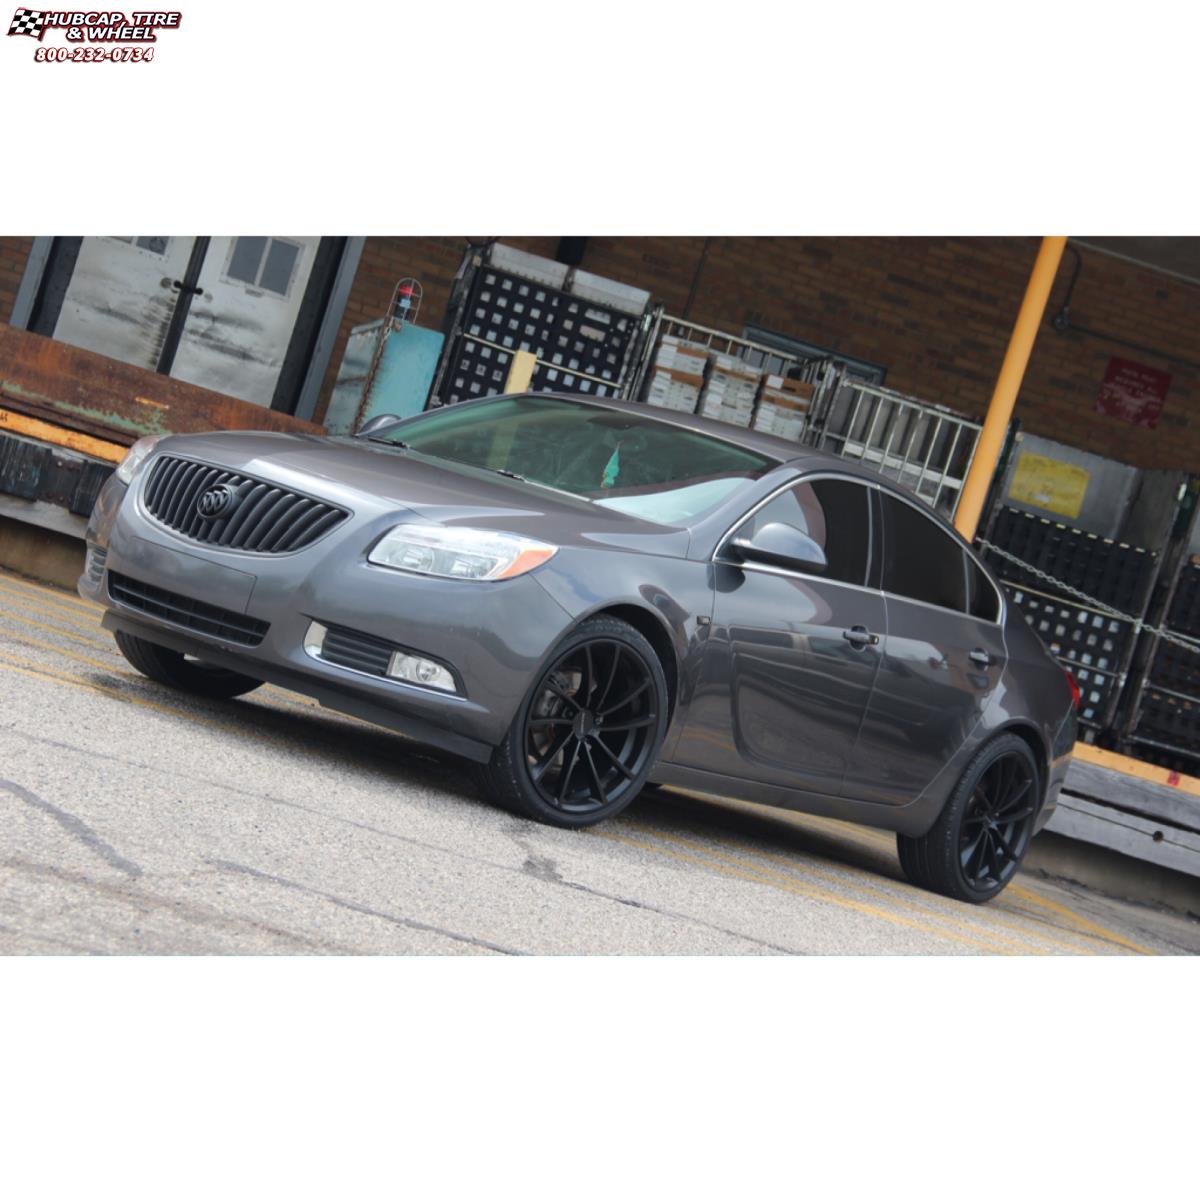 vehicle gallery/2011 buick regal xd series km691 spin 20x9   wheels and rims